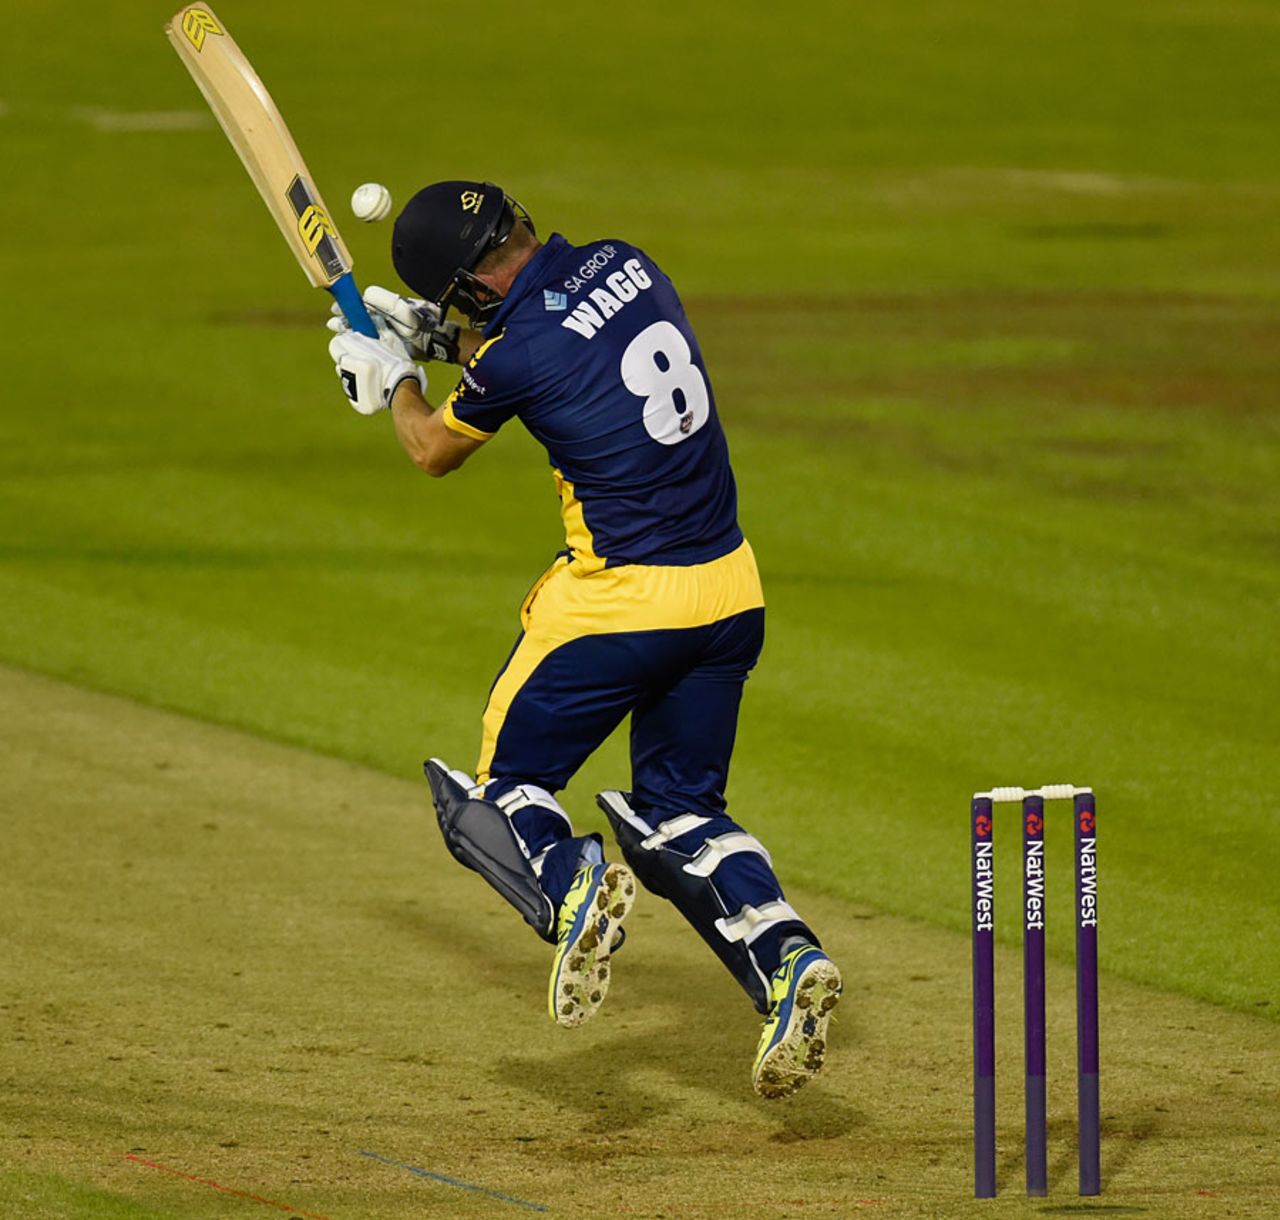 Graham Wagg takes a blow on the helmet, Glamorgan v Gloucestershire, NatWest T20 Blast, South Group, Cardiff, July 24, 2015